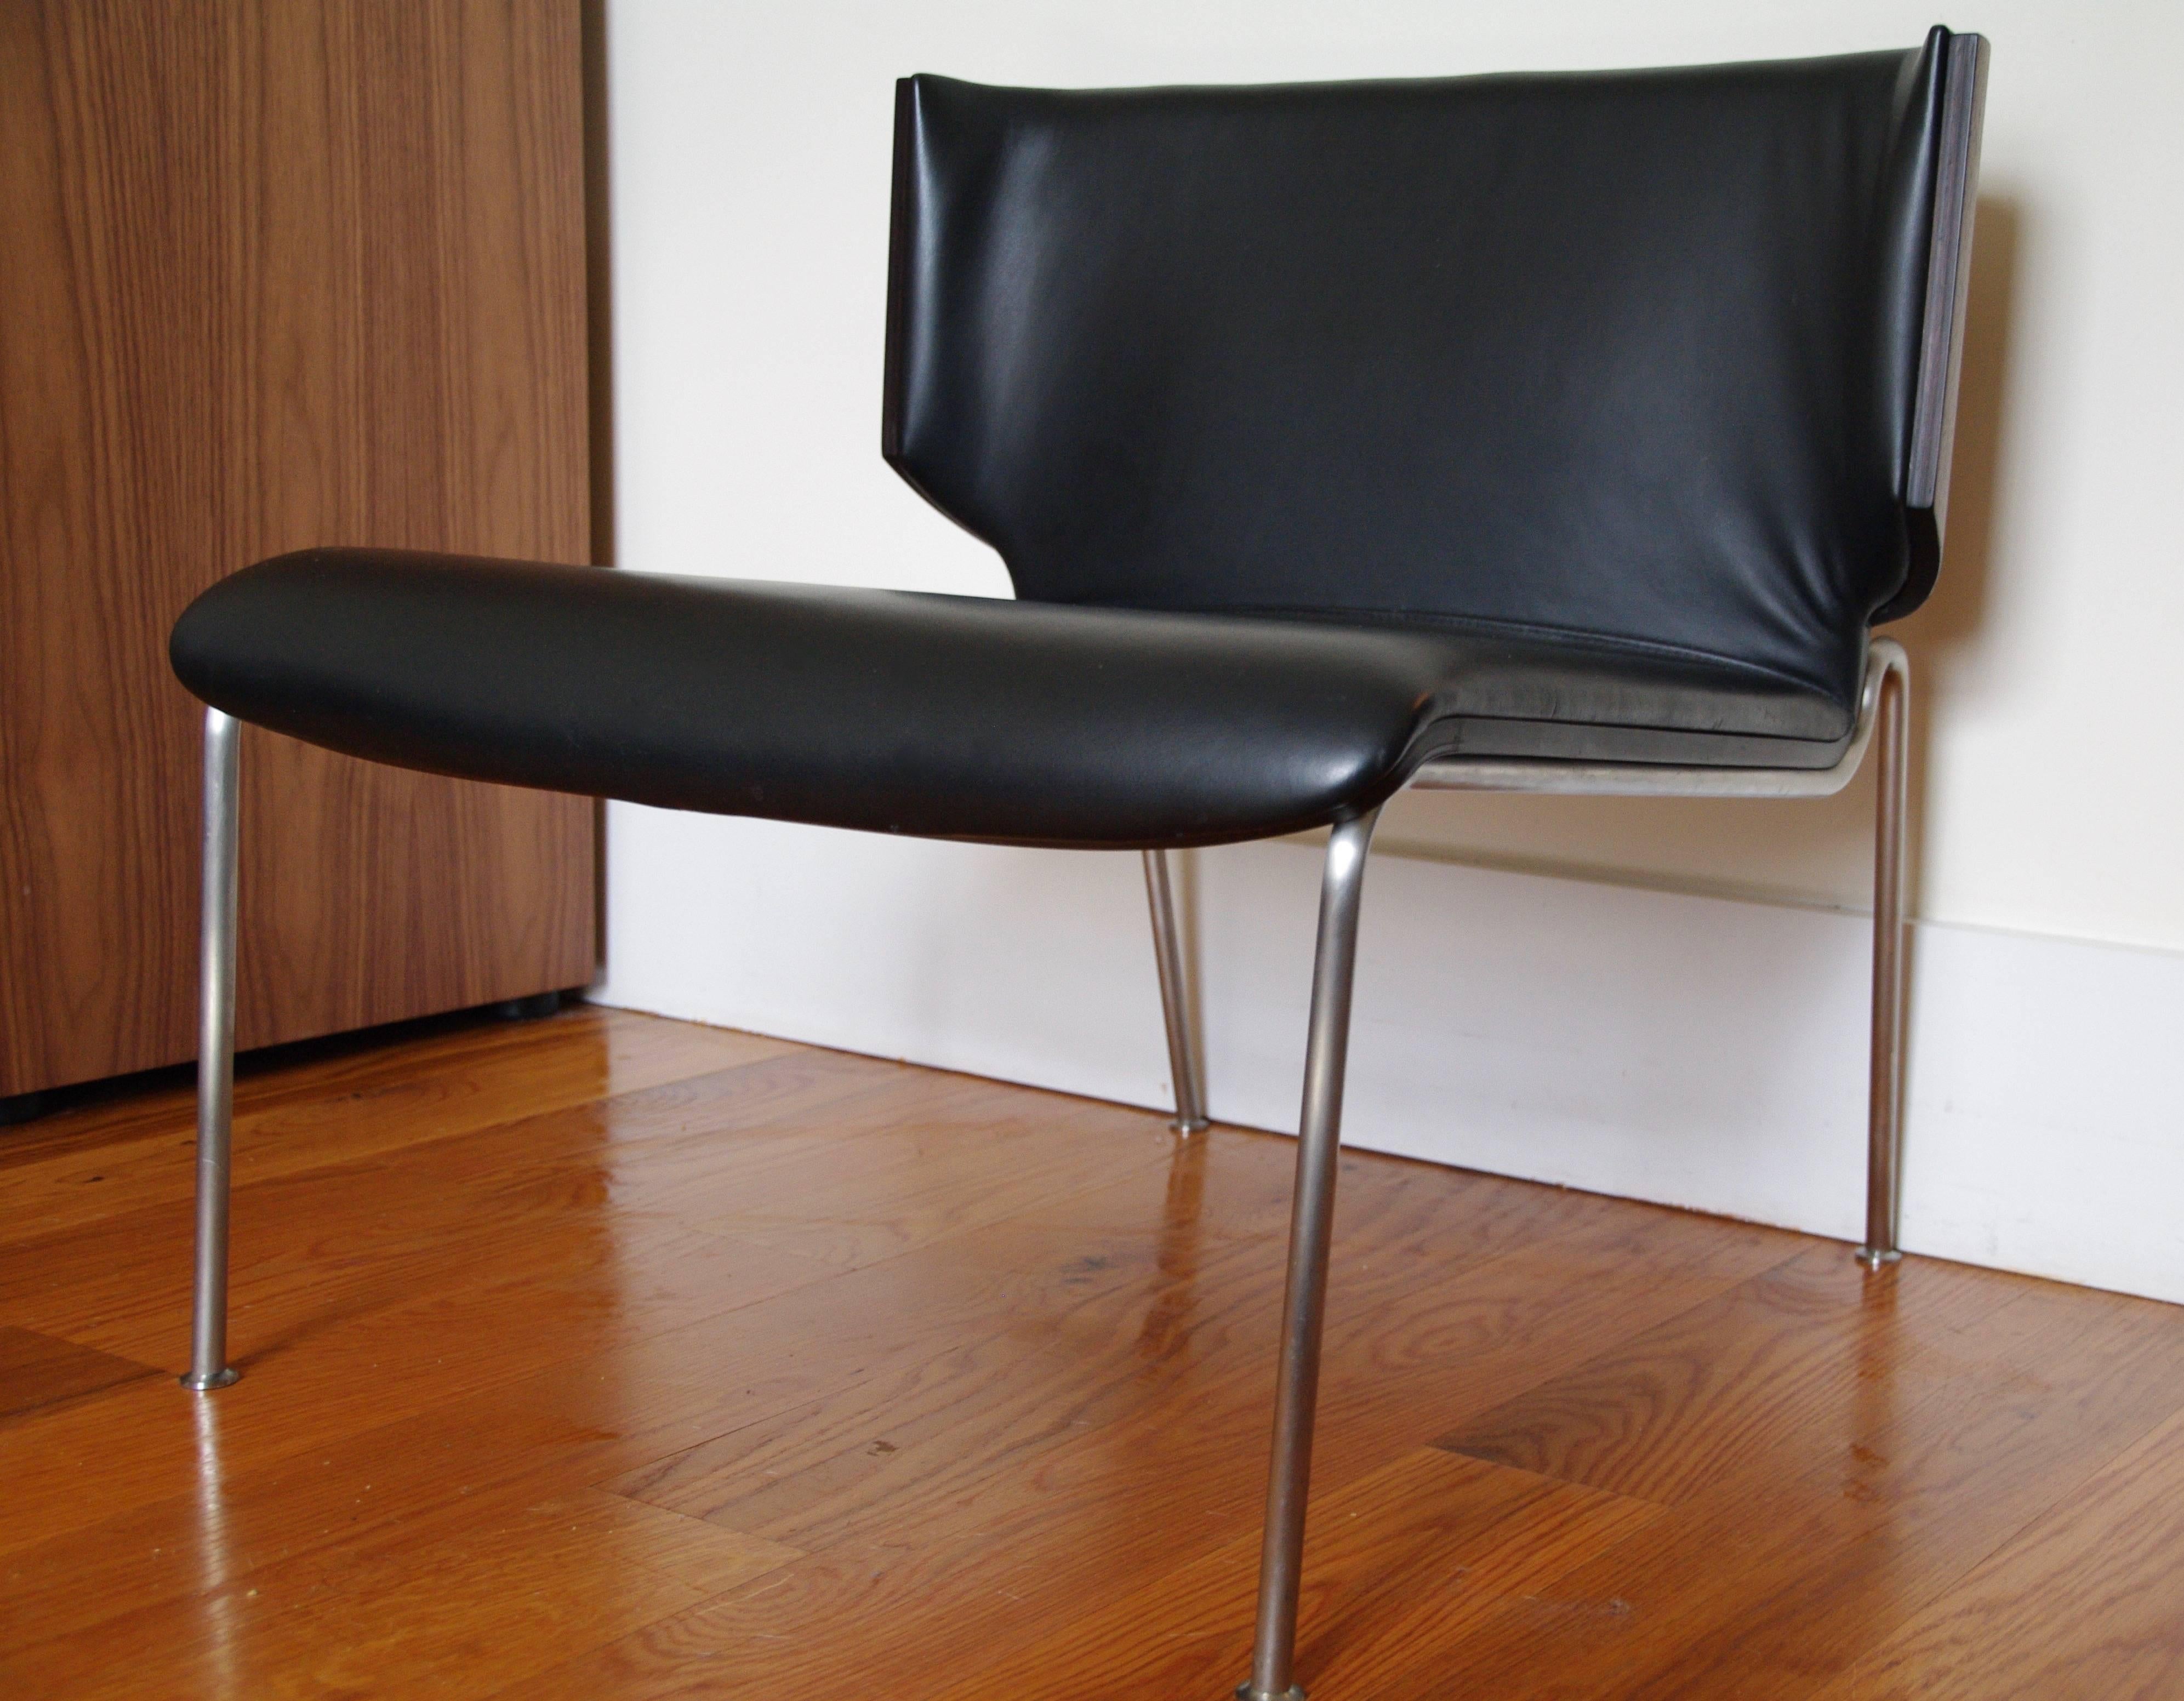 Contemporary Italian Modern Armchair, Black Leather and Wenge Wood, Italy For Sale